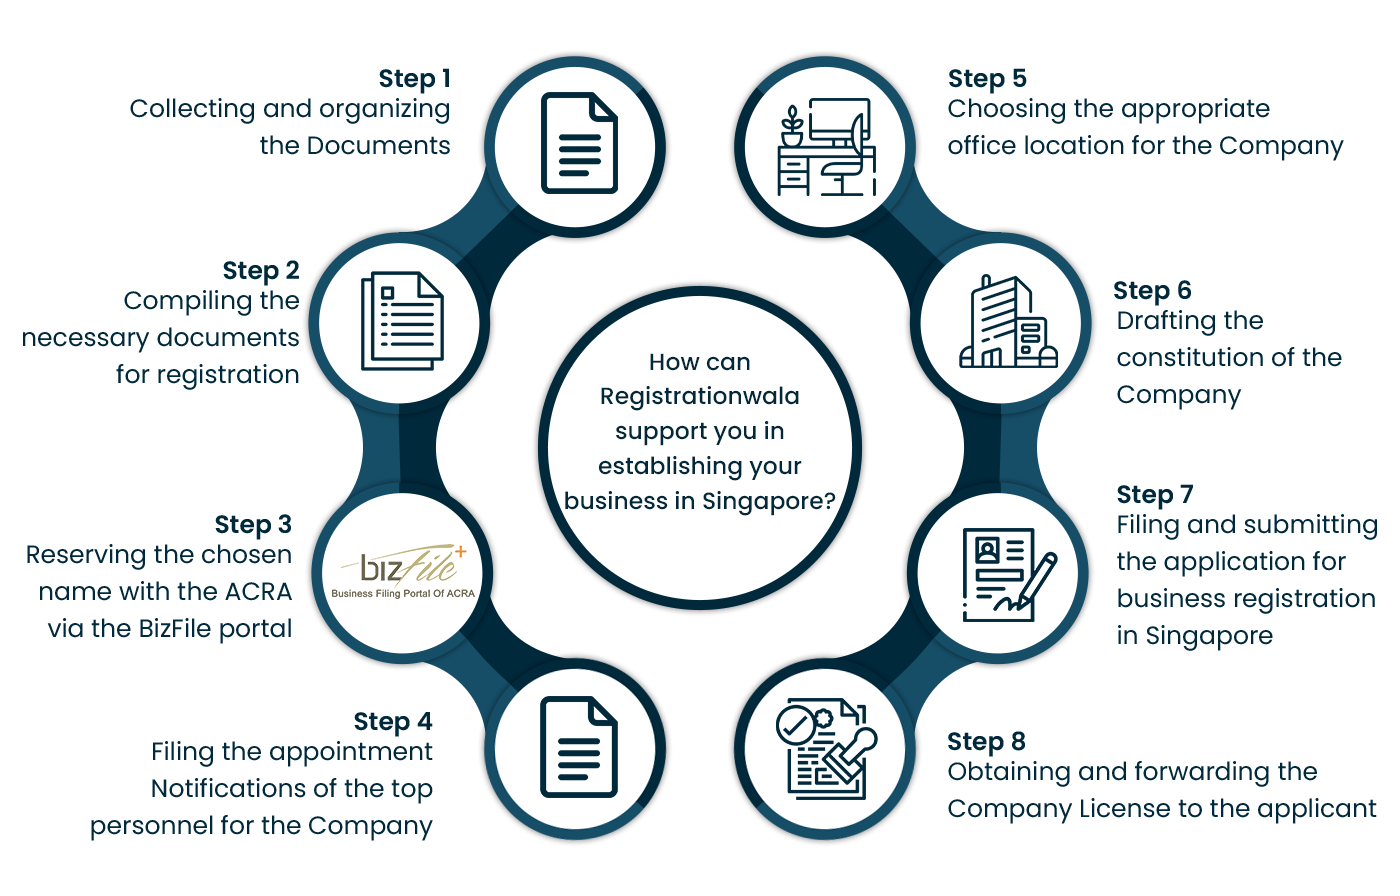 How can Registrationwala support you in establishing your business in Singapore?"